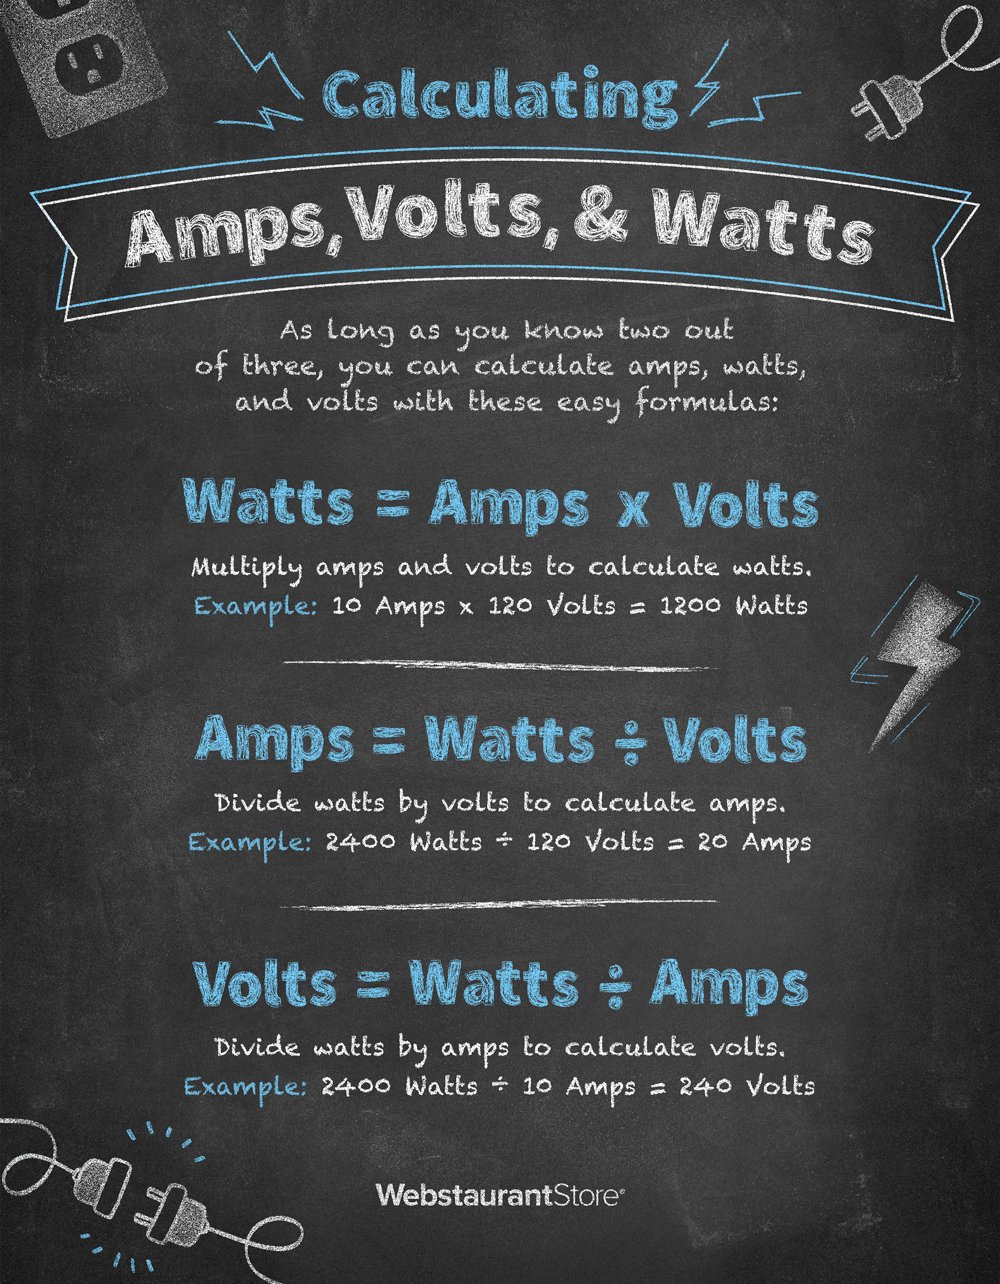 graphic showing watts, amps, and volts equations